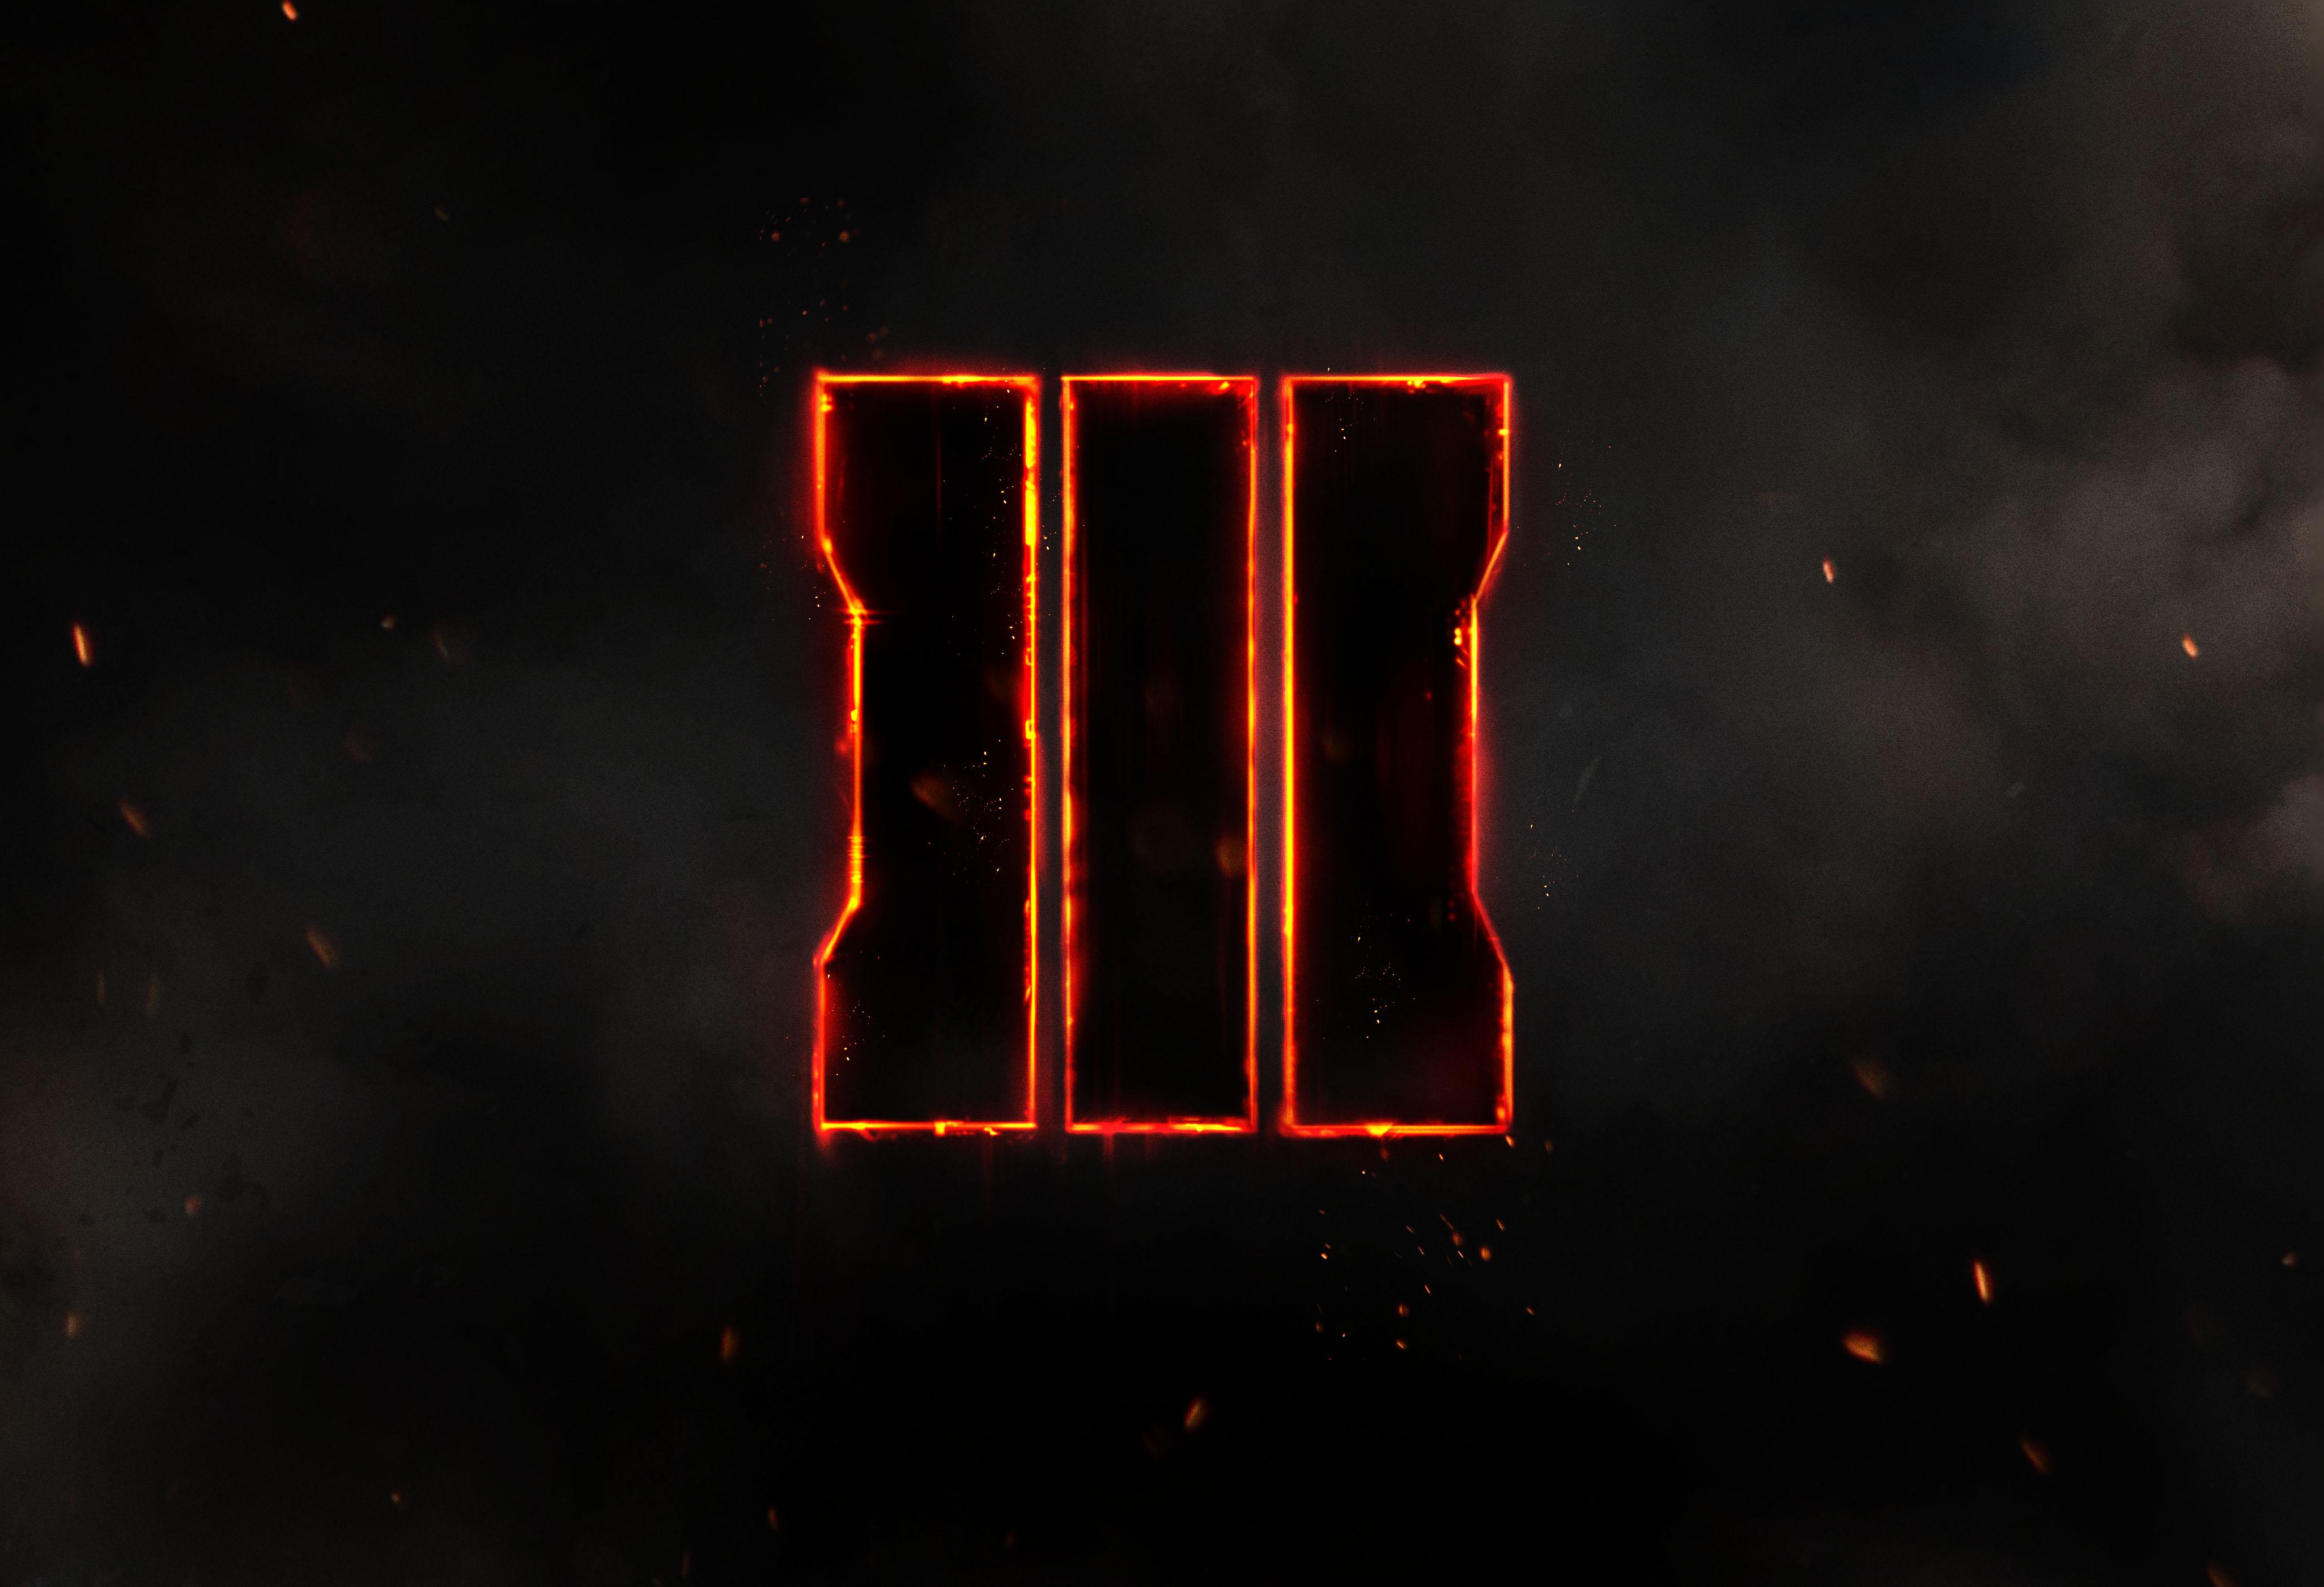 Call of Duty Black Ops III Officially Announced by Activision World